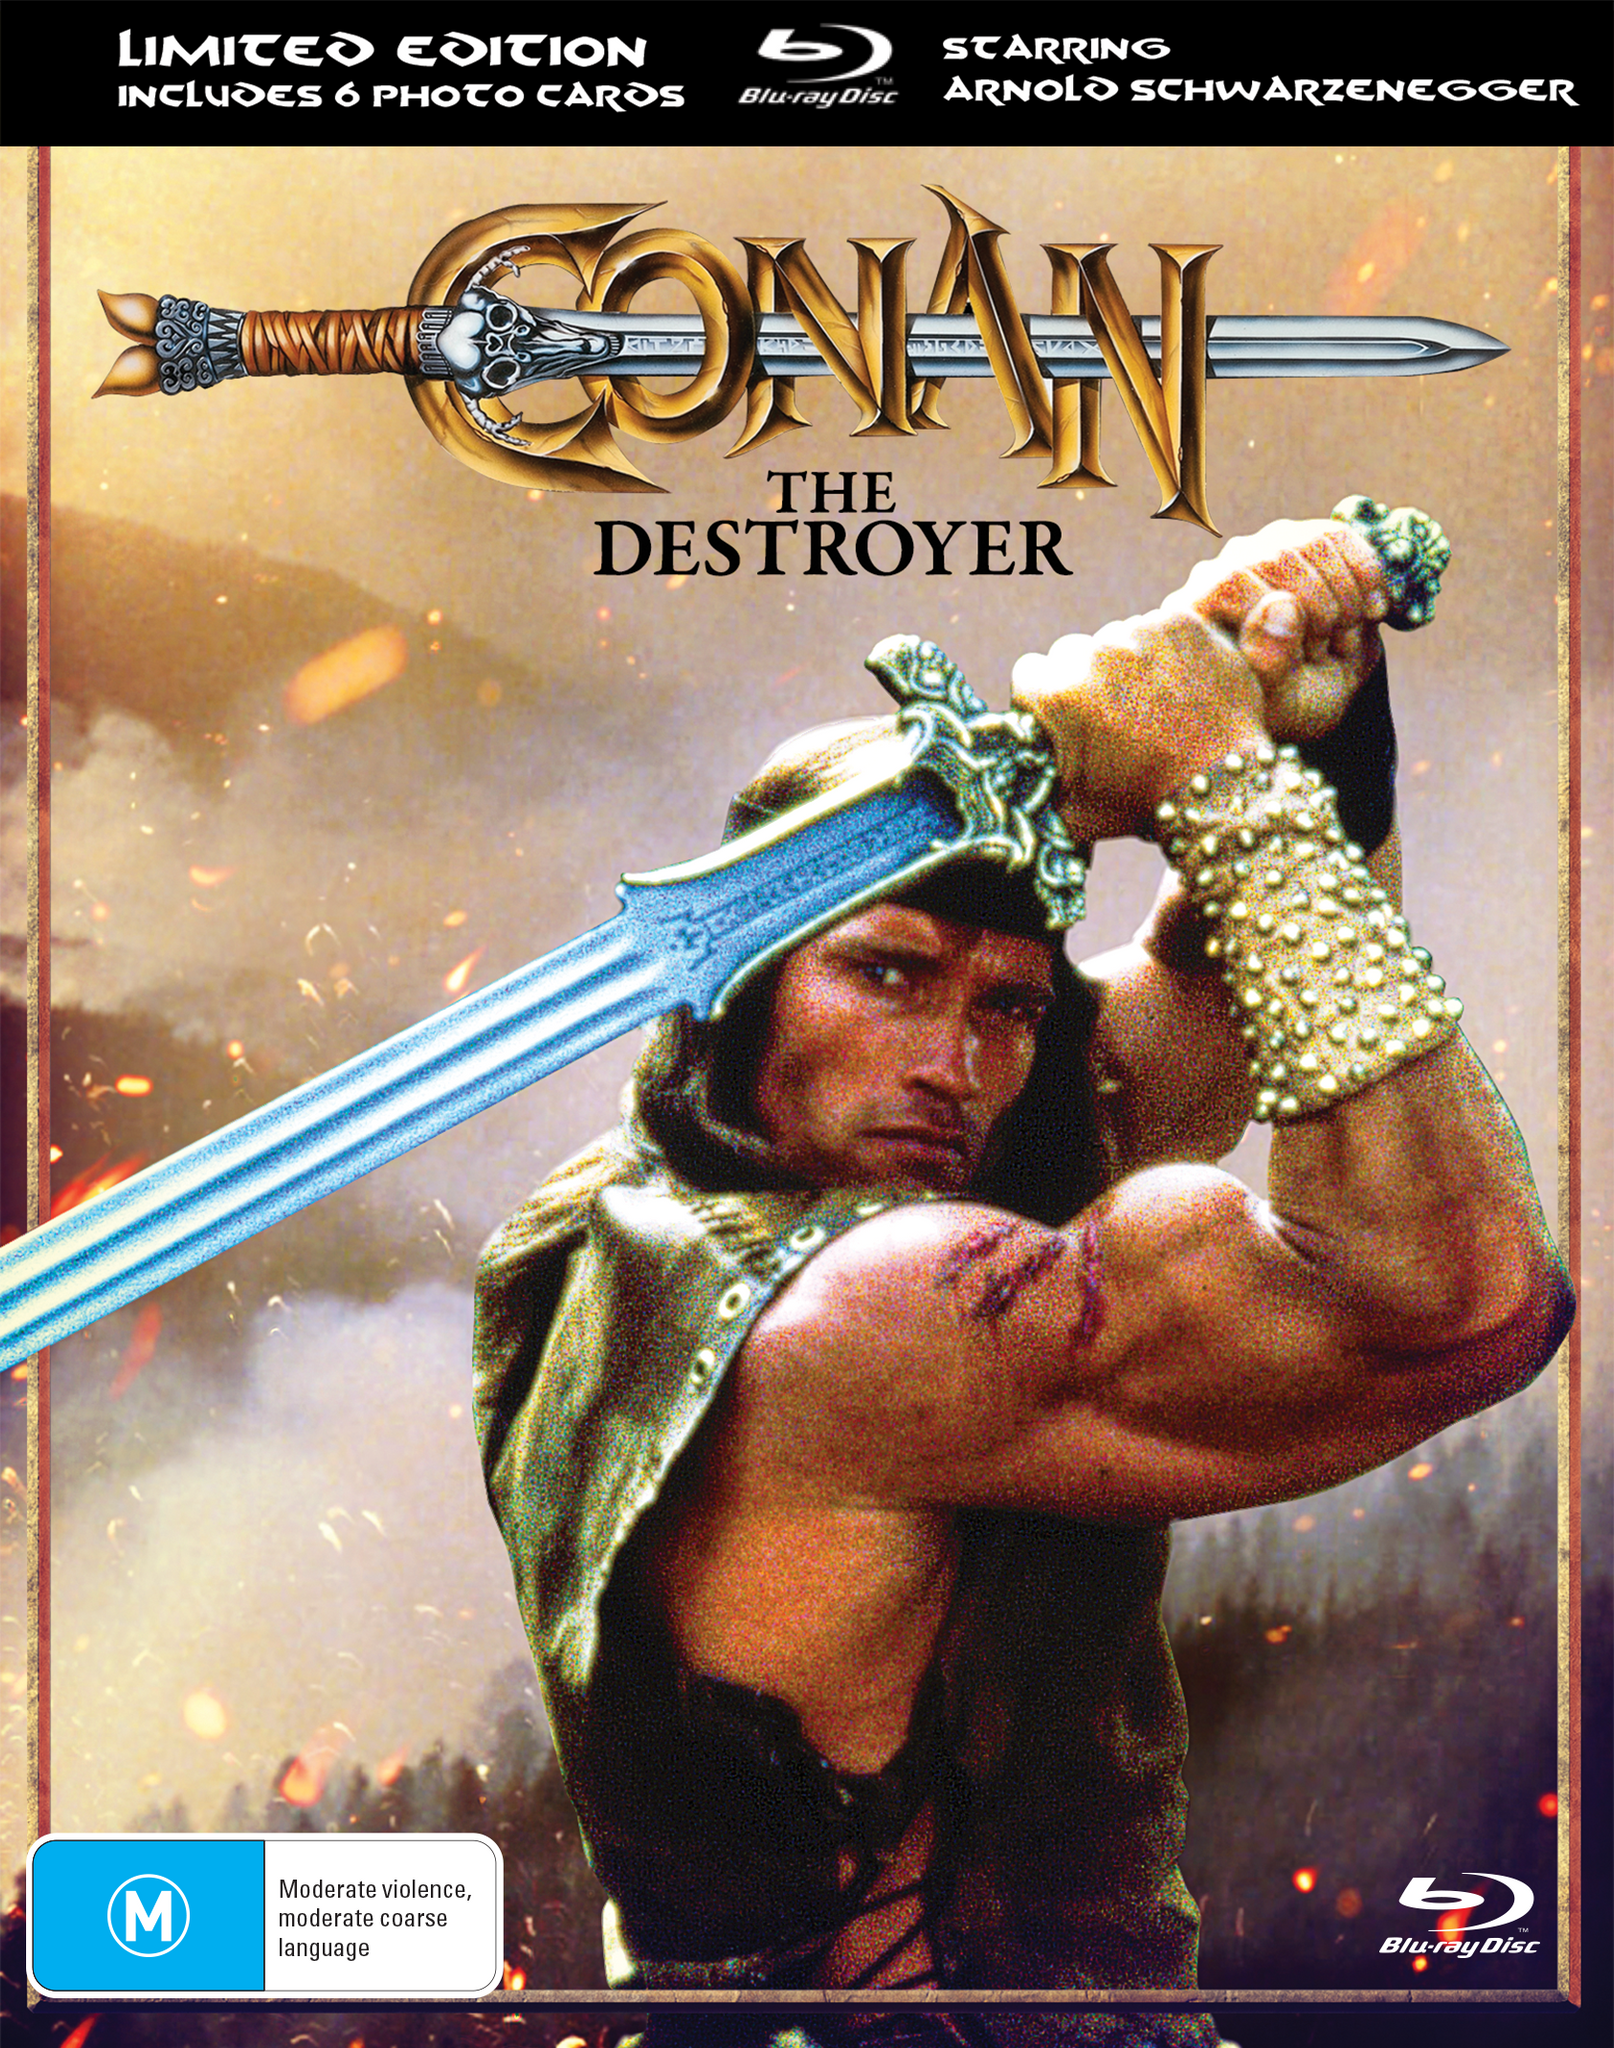 CONAN THE DESTROYER - LIMITED EDITION BLU-RAY (LENTICULAR HARDCOVER + PHOTO CARDS)